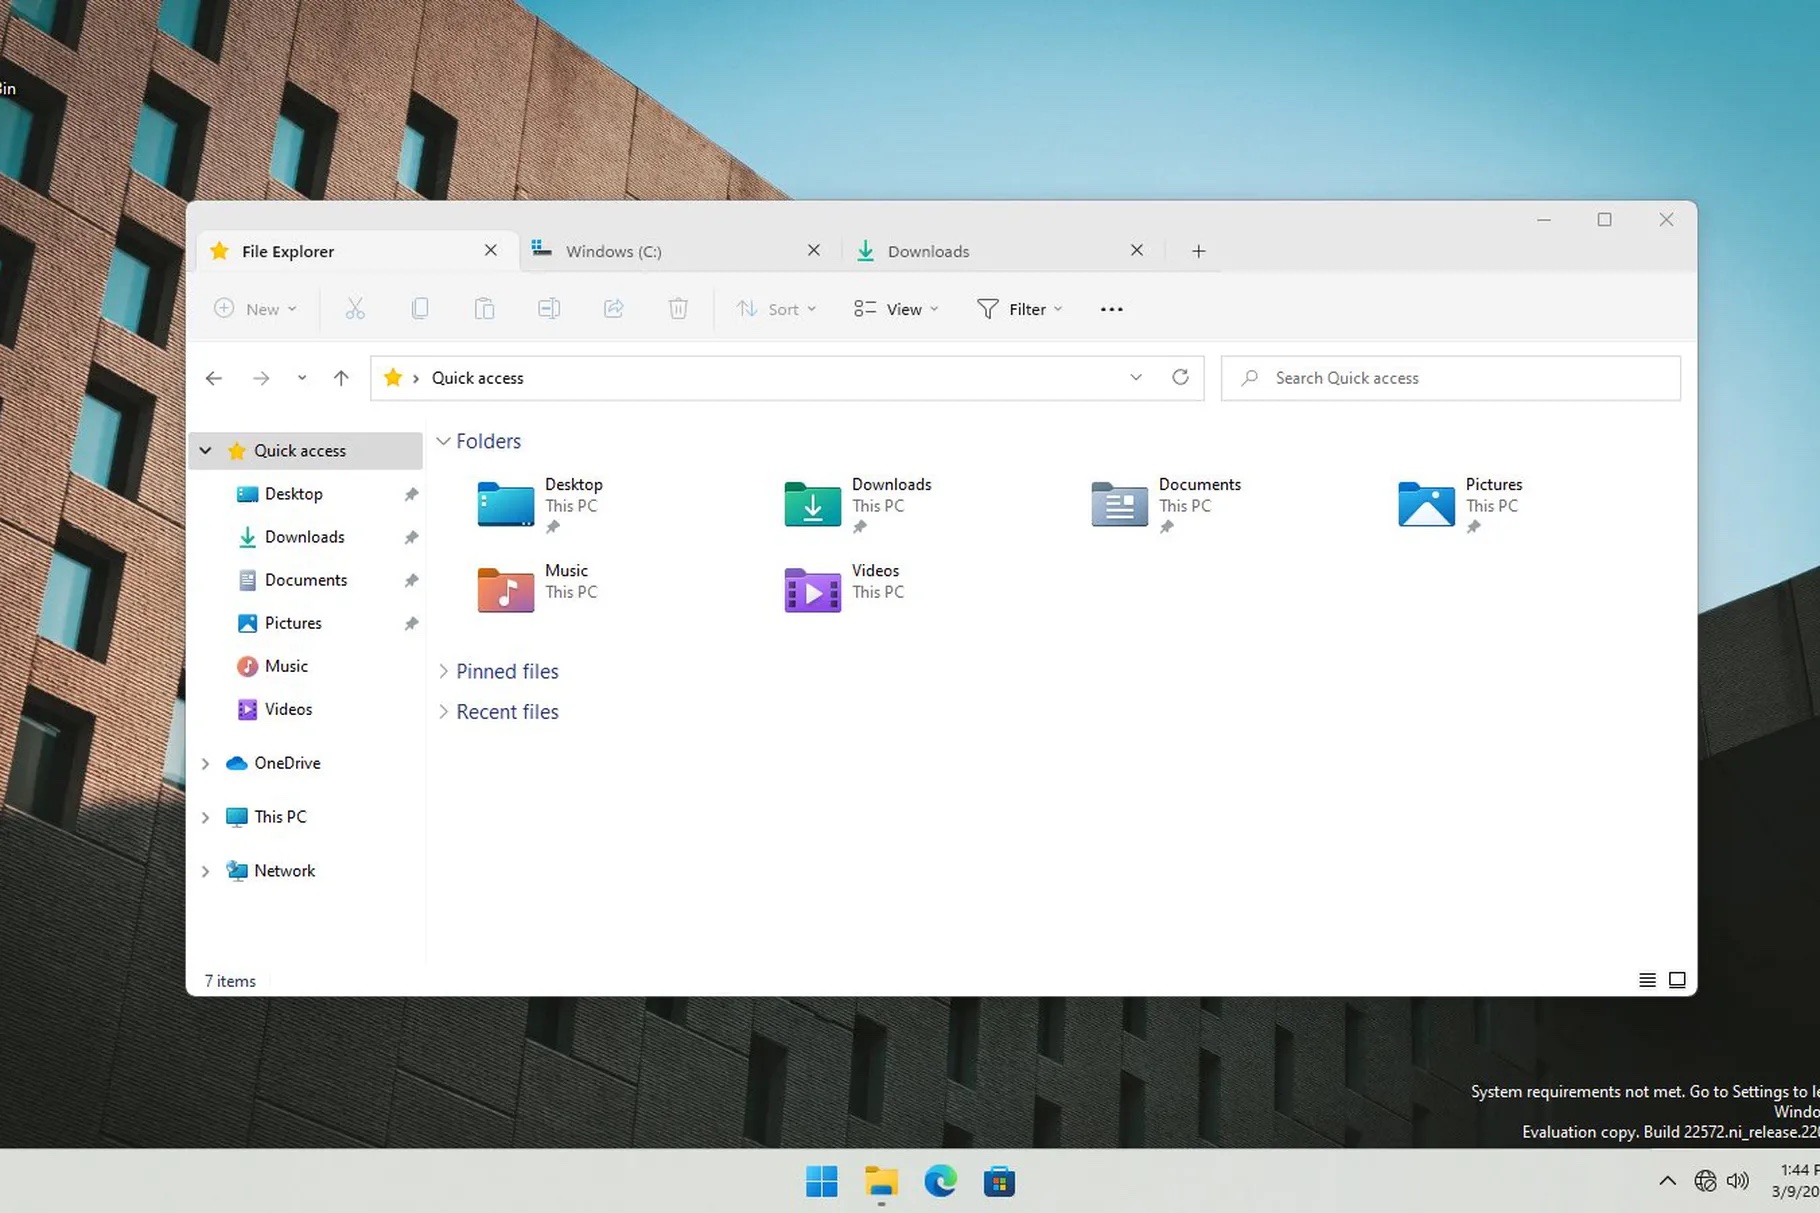 Microsoft is enhancing File Explorer in Windows 11 by introducing tabs